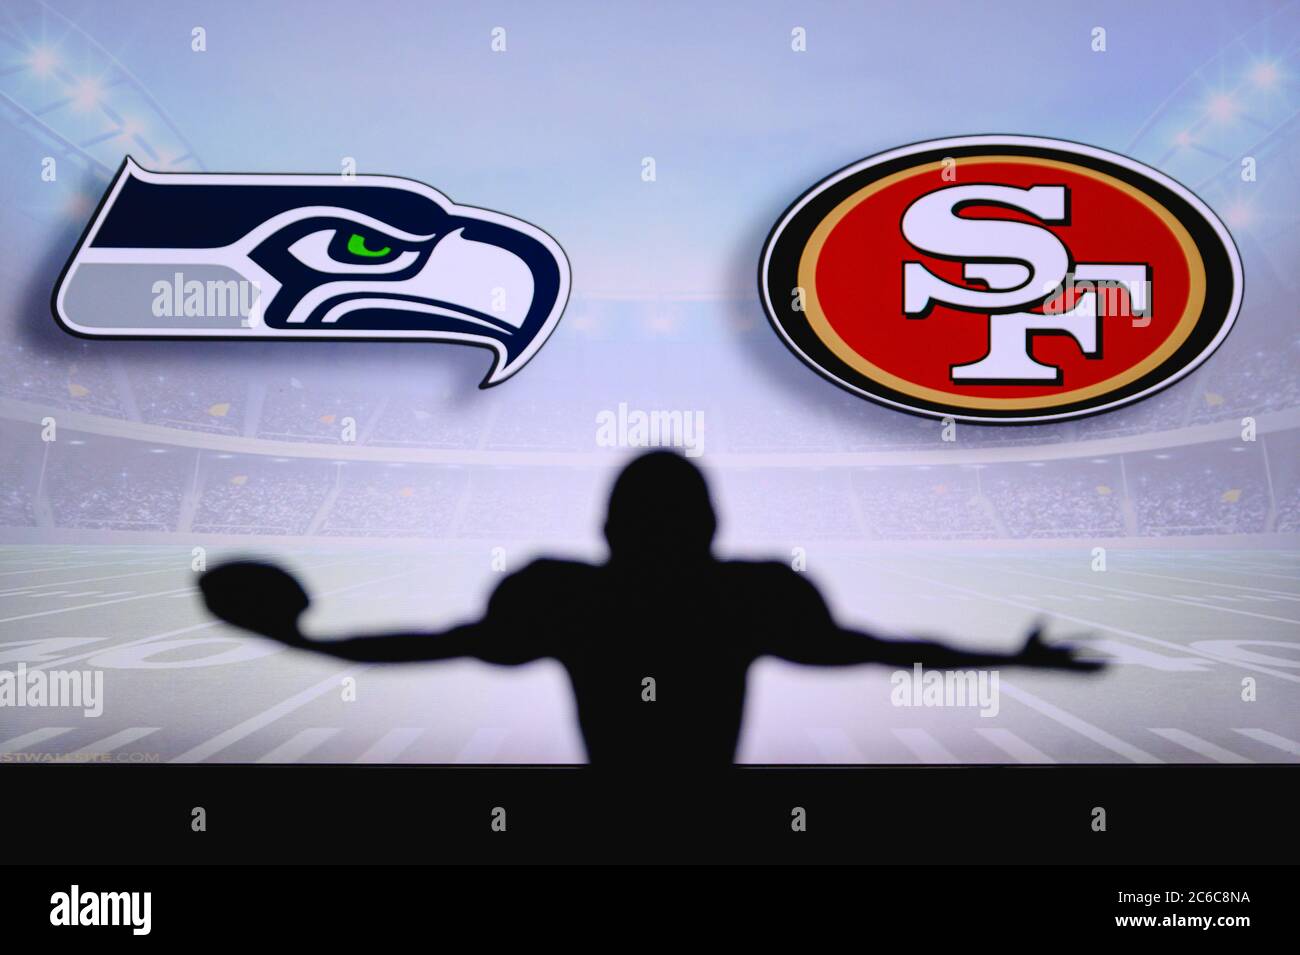 seahawks vs 49ers images